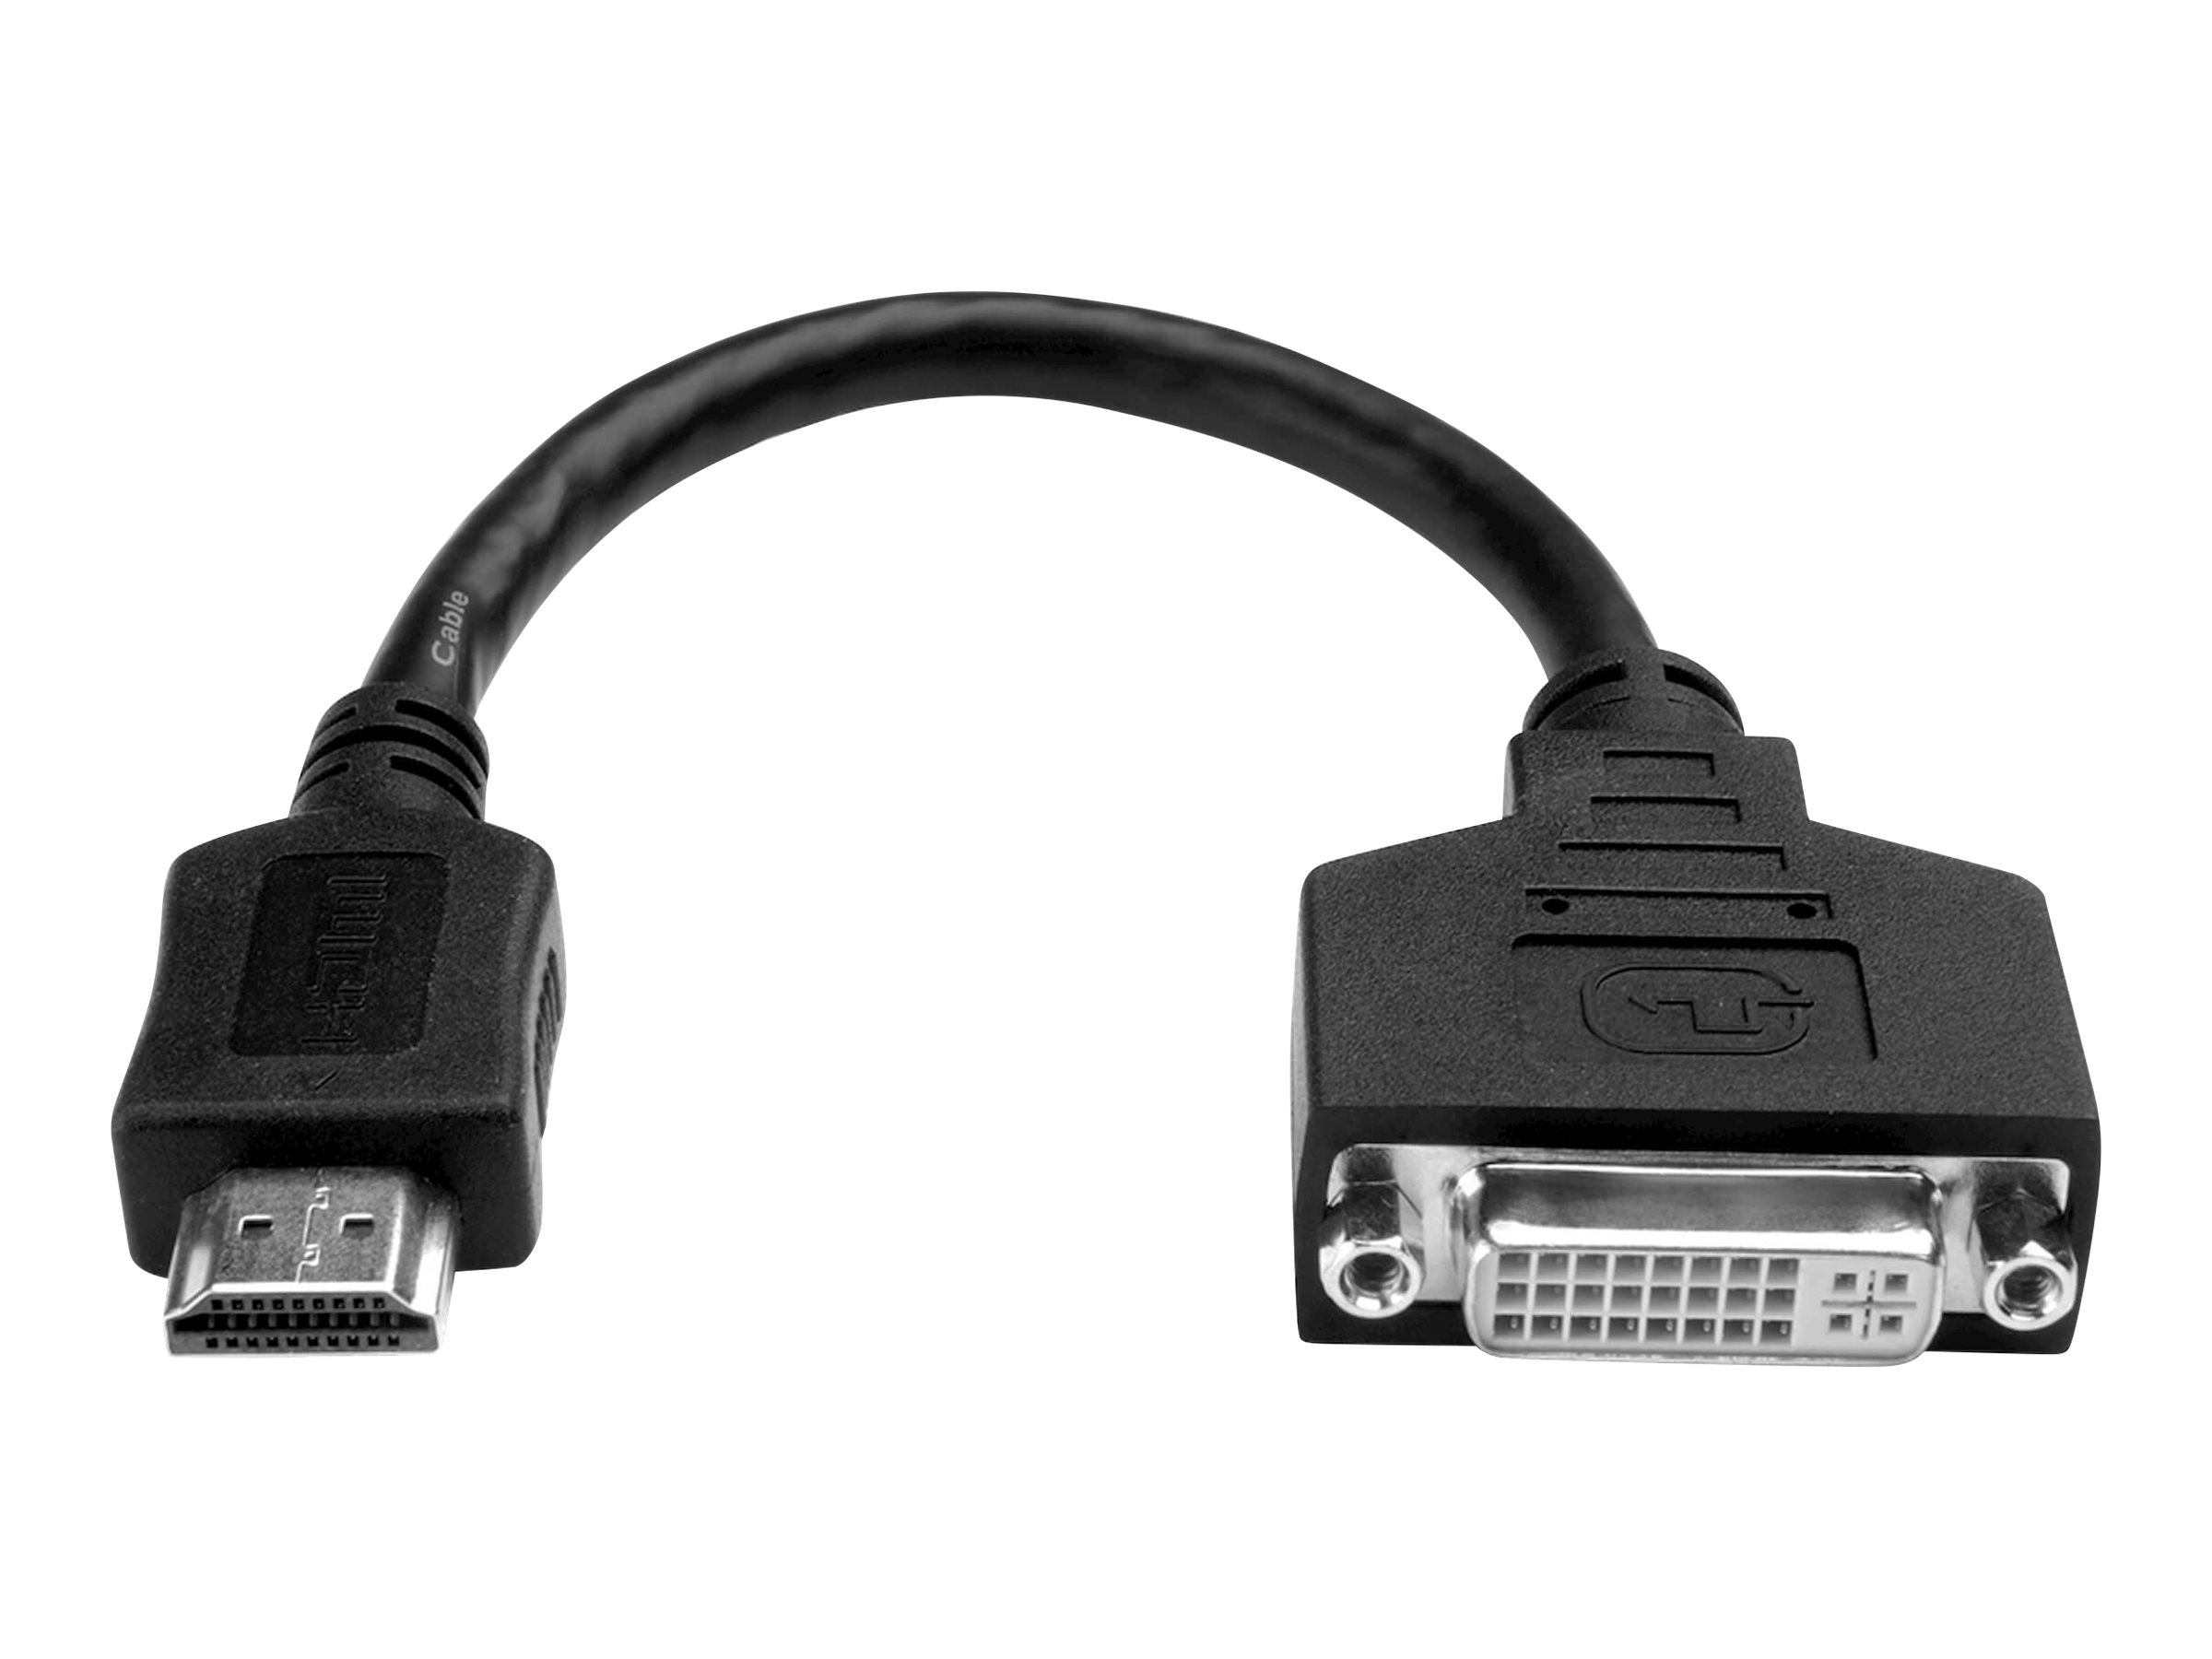 Tripp Lite 8in HDMI to DVI Cable Adapter Converter HDMI Male to DVI-D Female 8" - video adapter - 20.3 cm